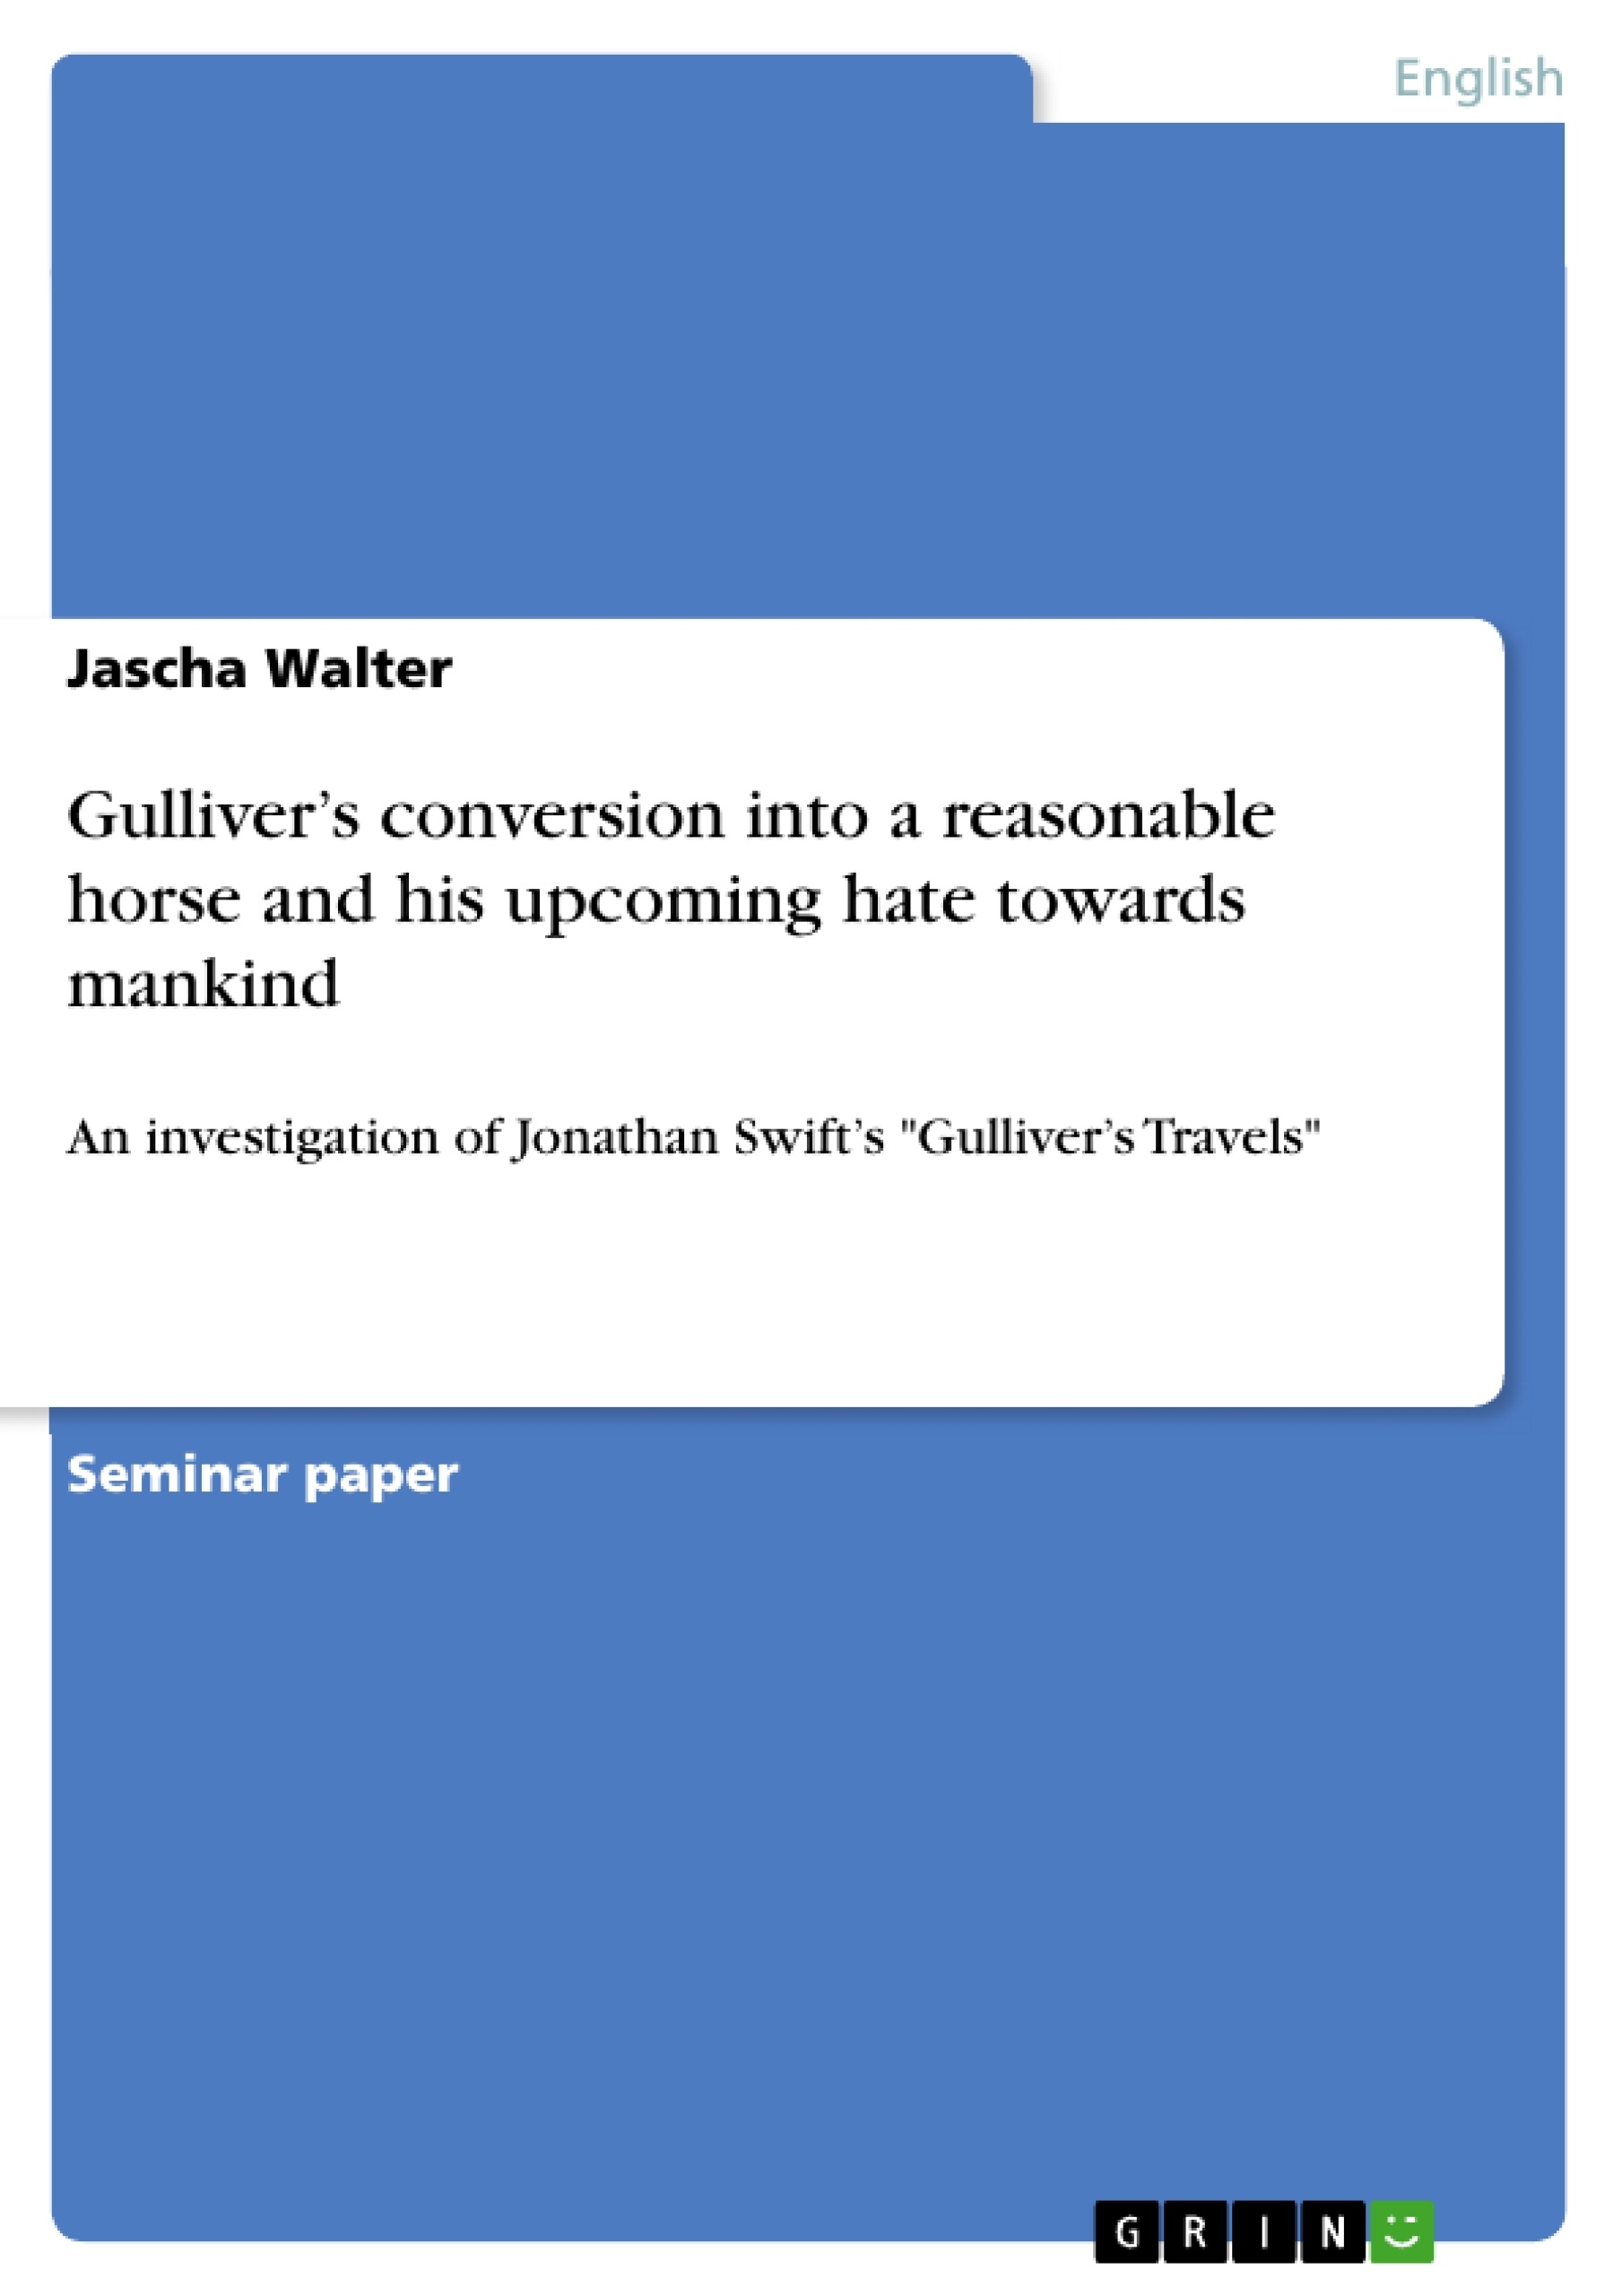 Título: Gulliver’s conversion into a reasonable horse and his upcoming hate towards mankind